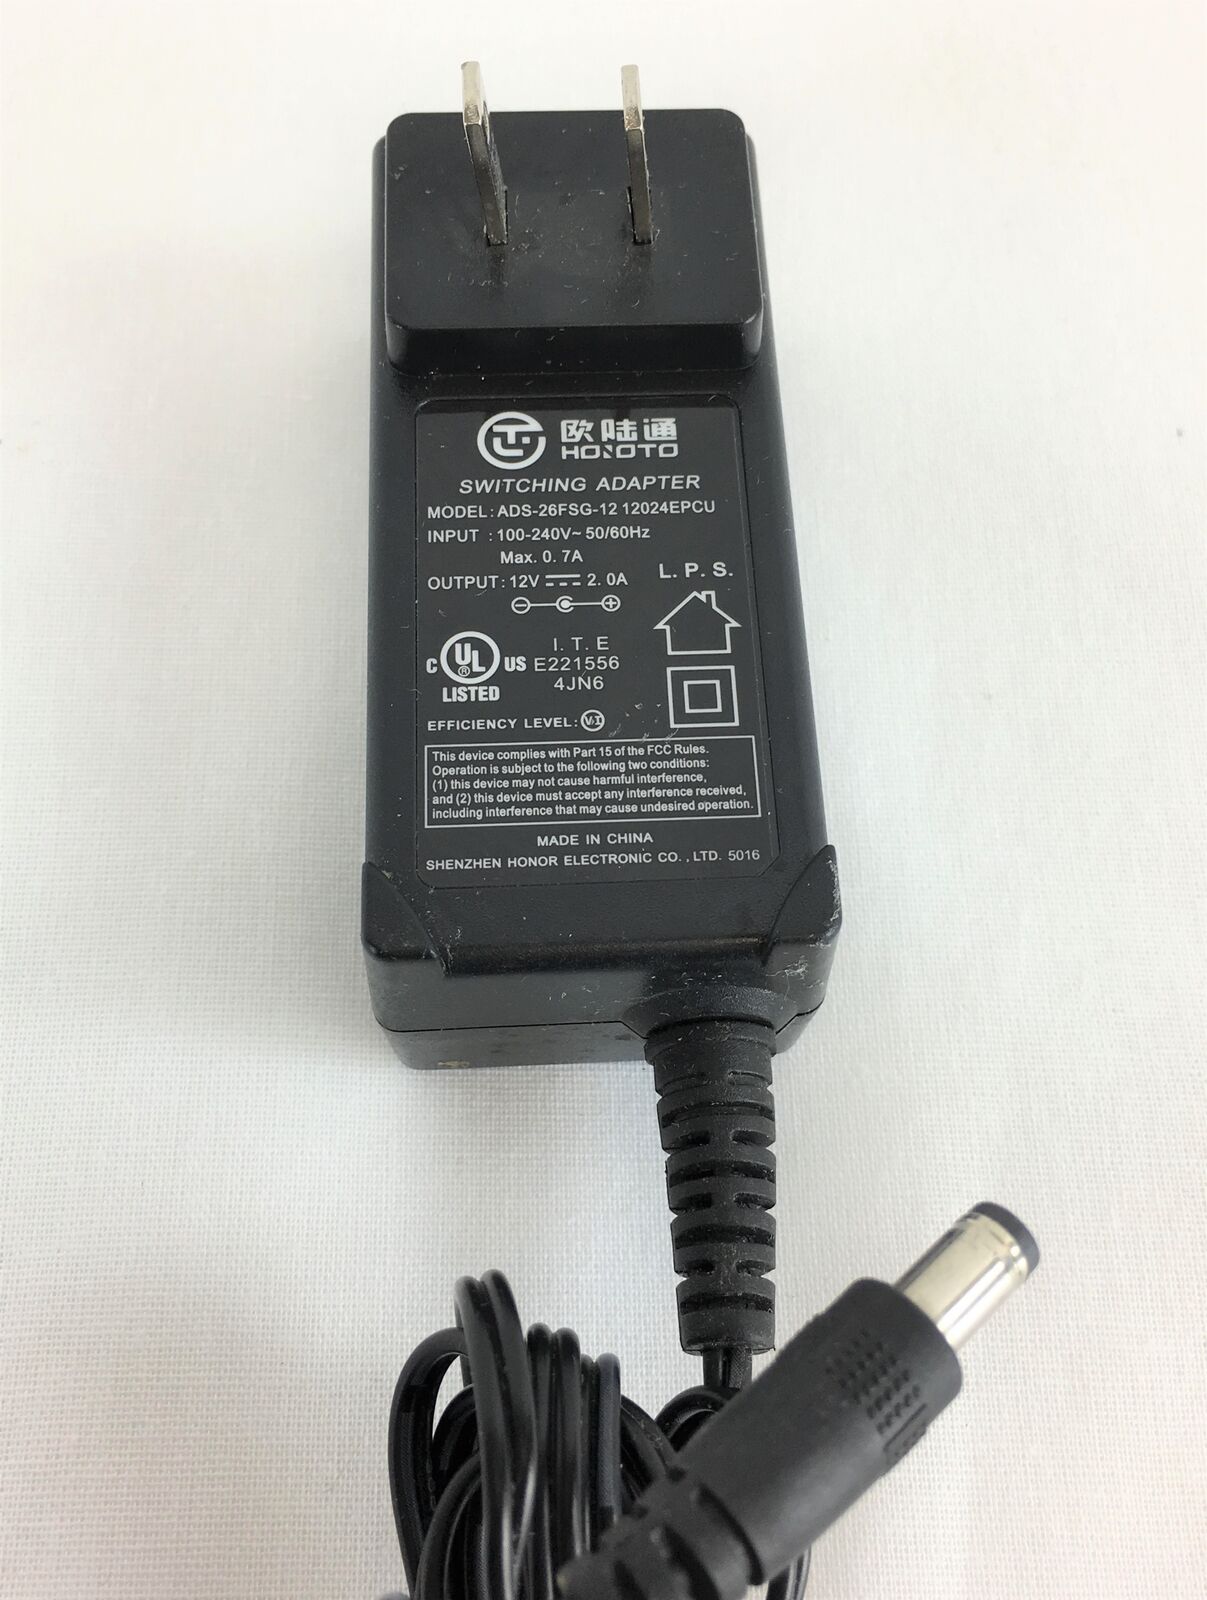 NEW 12V 2.0A Switching Adapter HOIOTO ADS-26FSG-12 12024EPCU Power Supply Power Supply Charger